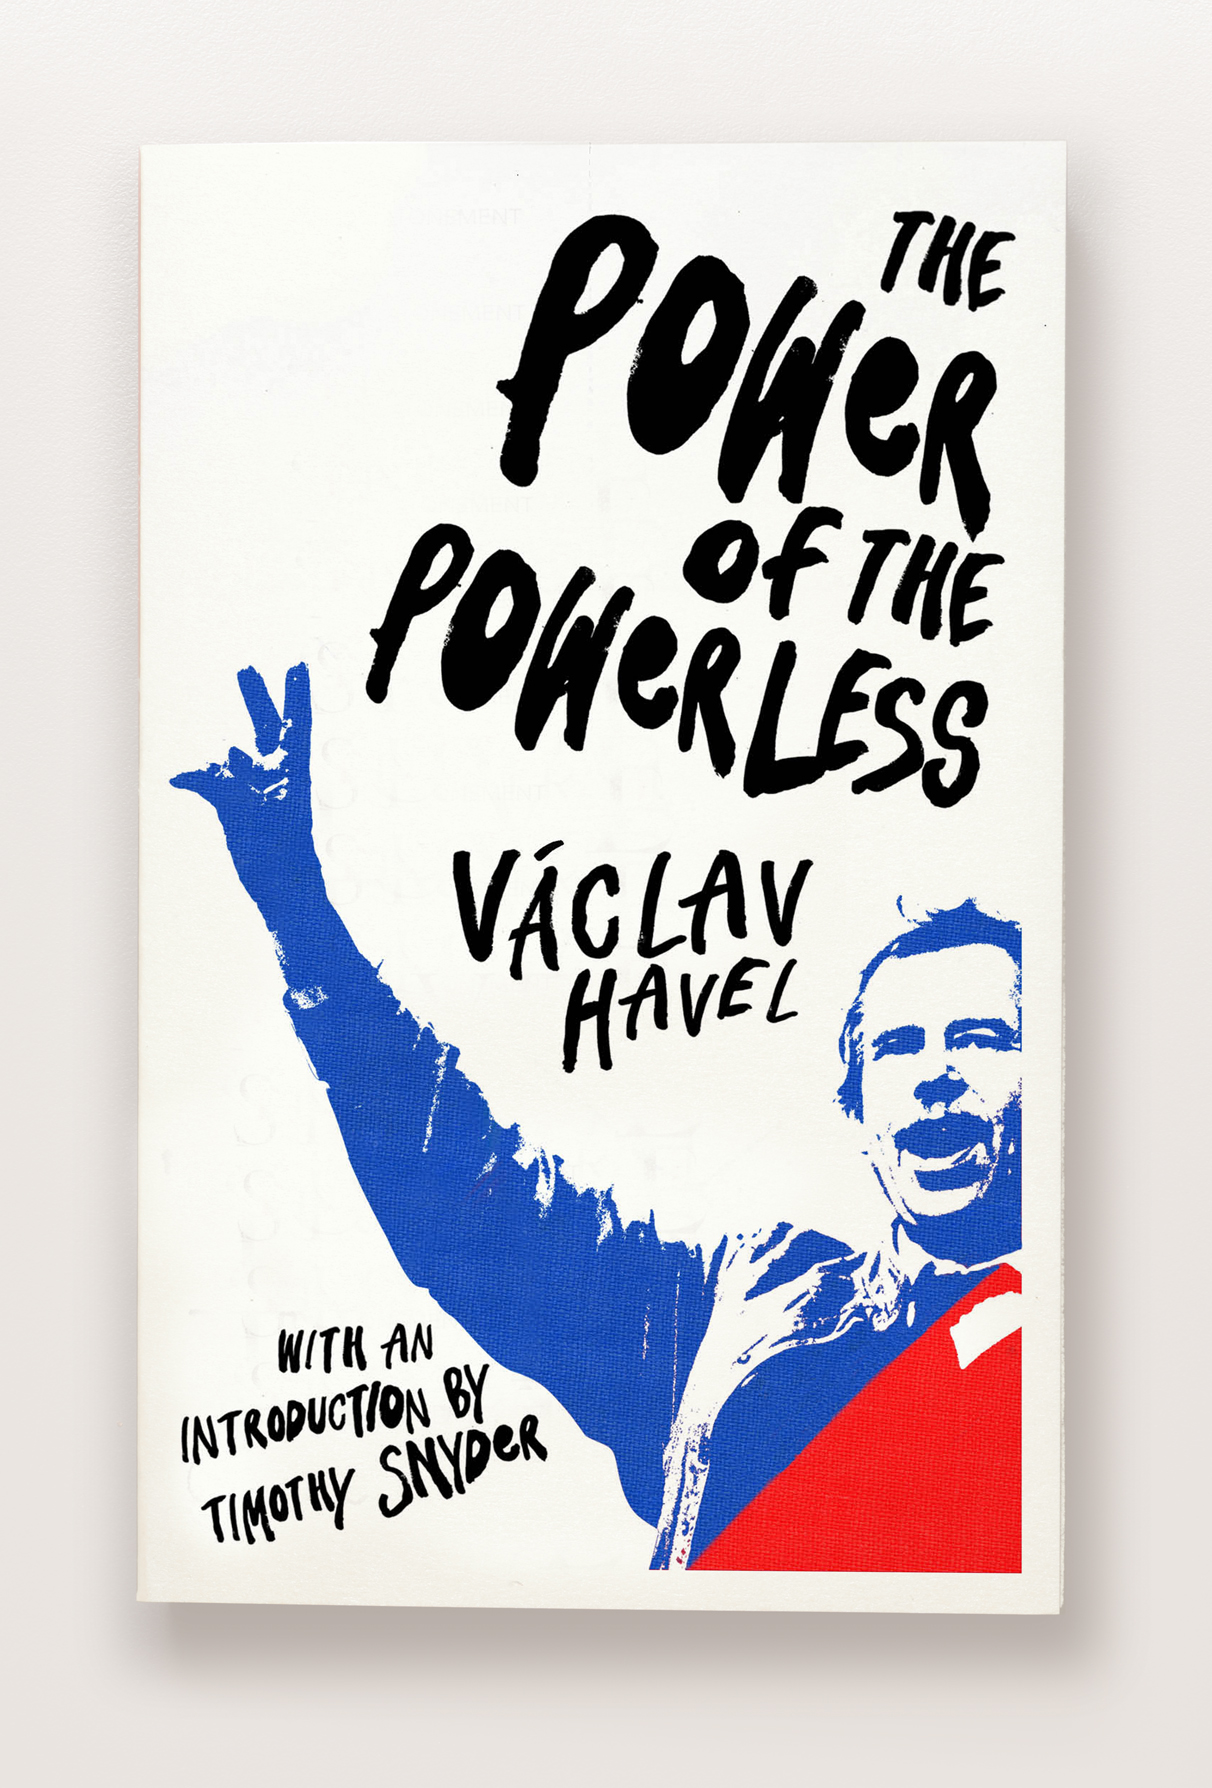 MORE ABOUT 'POWER OF THE POWERLESS'